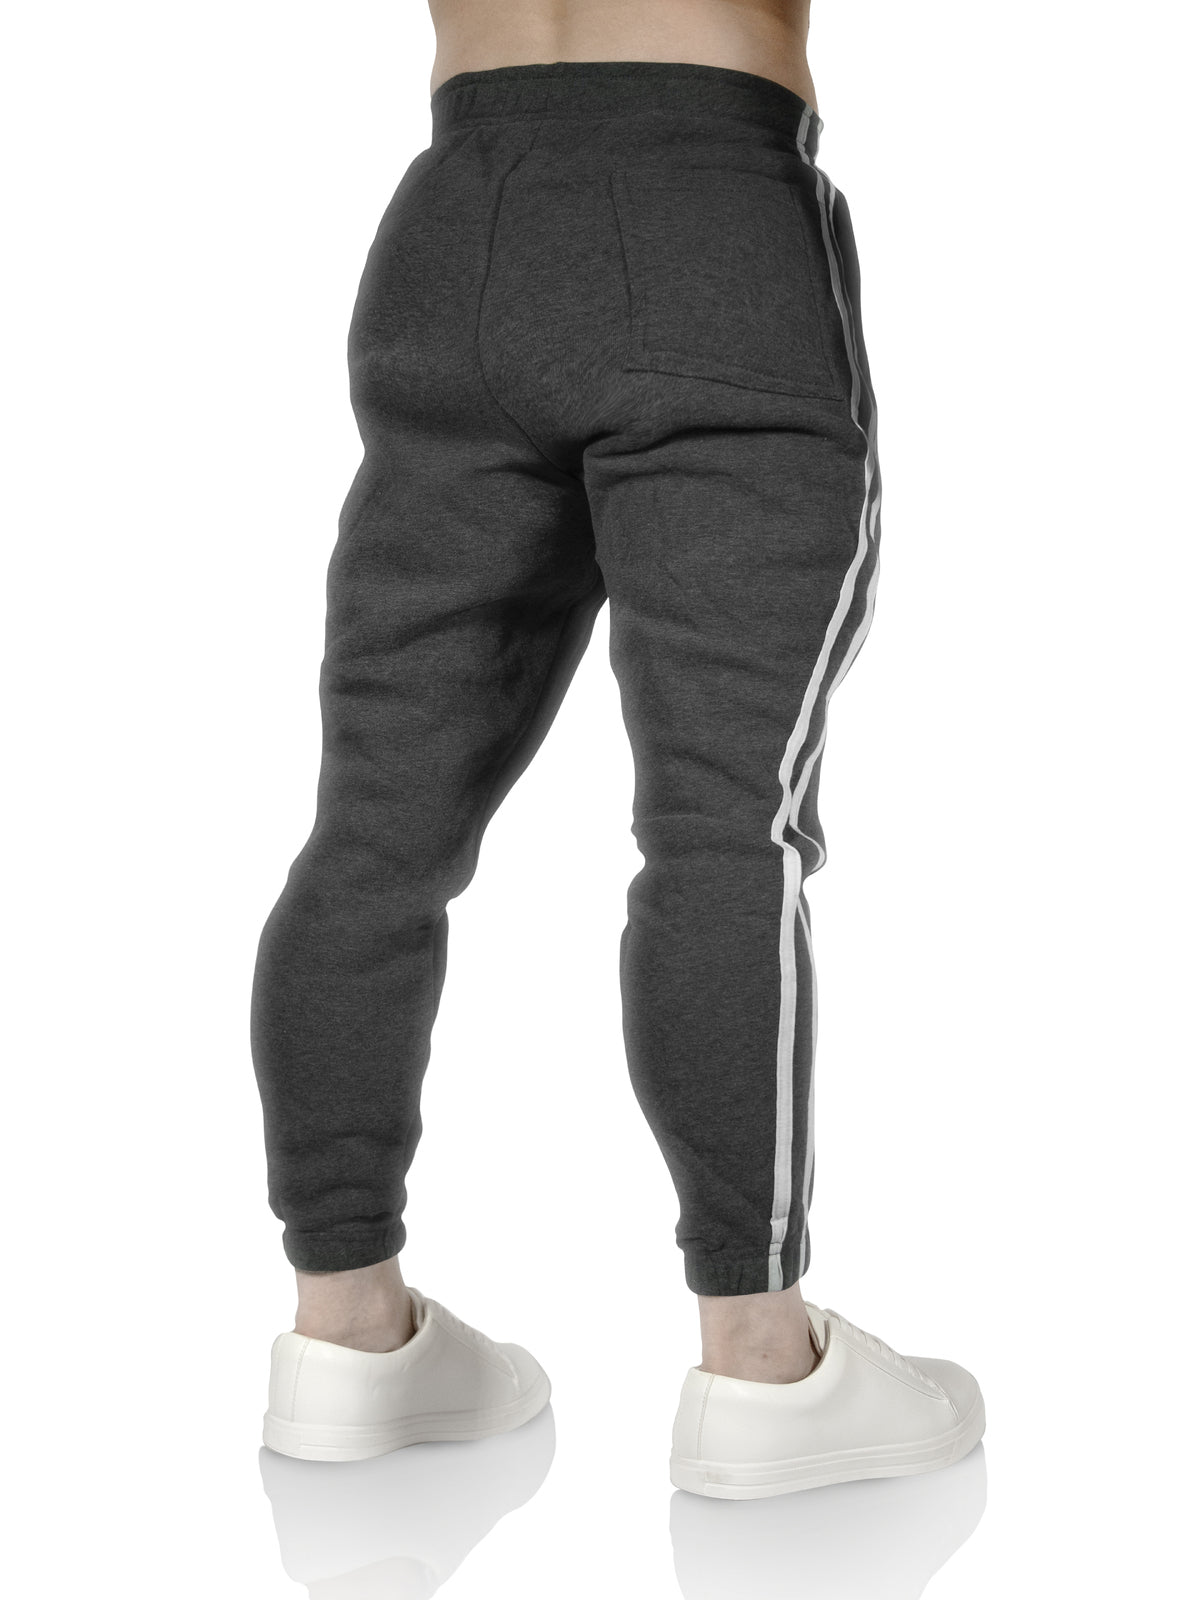 Mens Fleece Skinny Track Pants Jogger Gym Casual Sweat Trackies Warm Trousers - Charcoal Marle/White Stripe - M